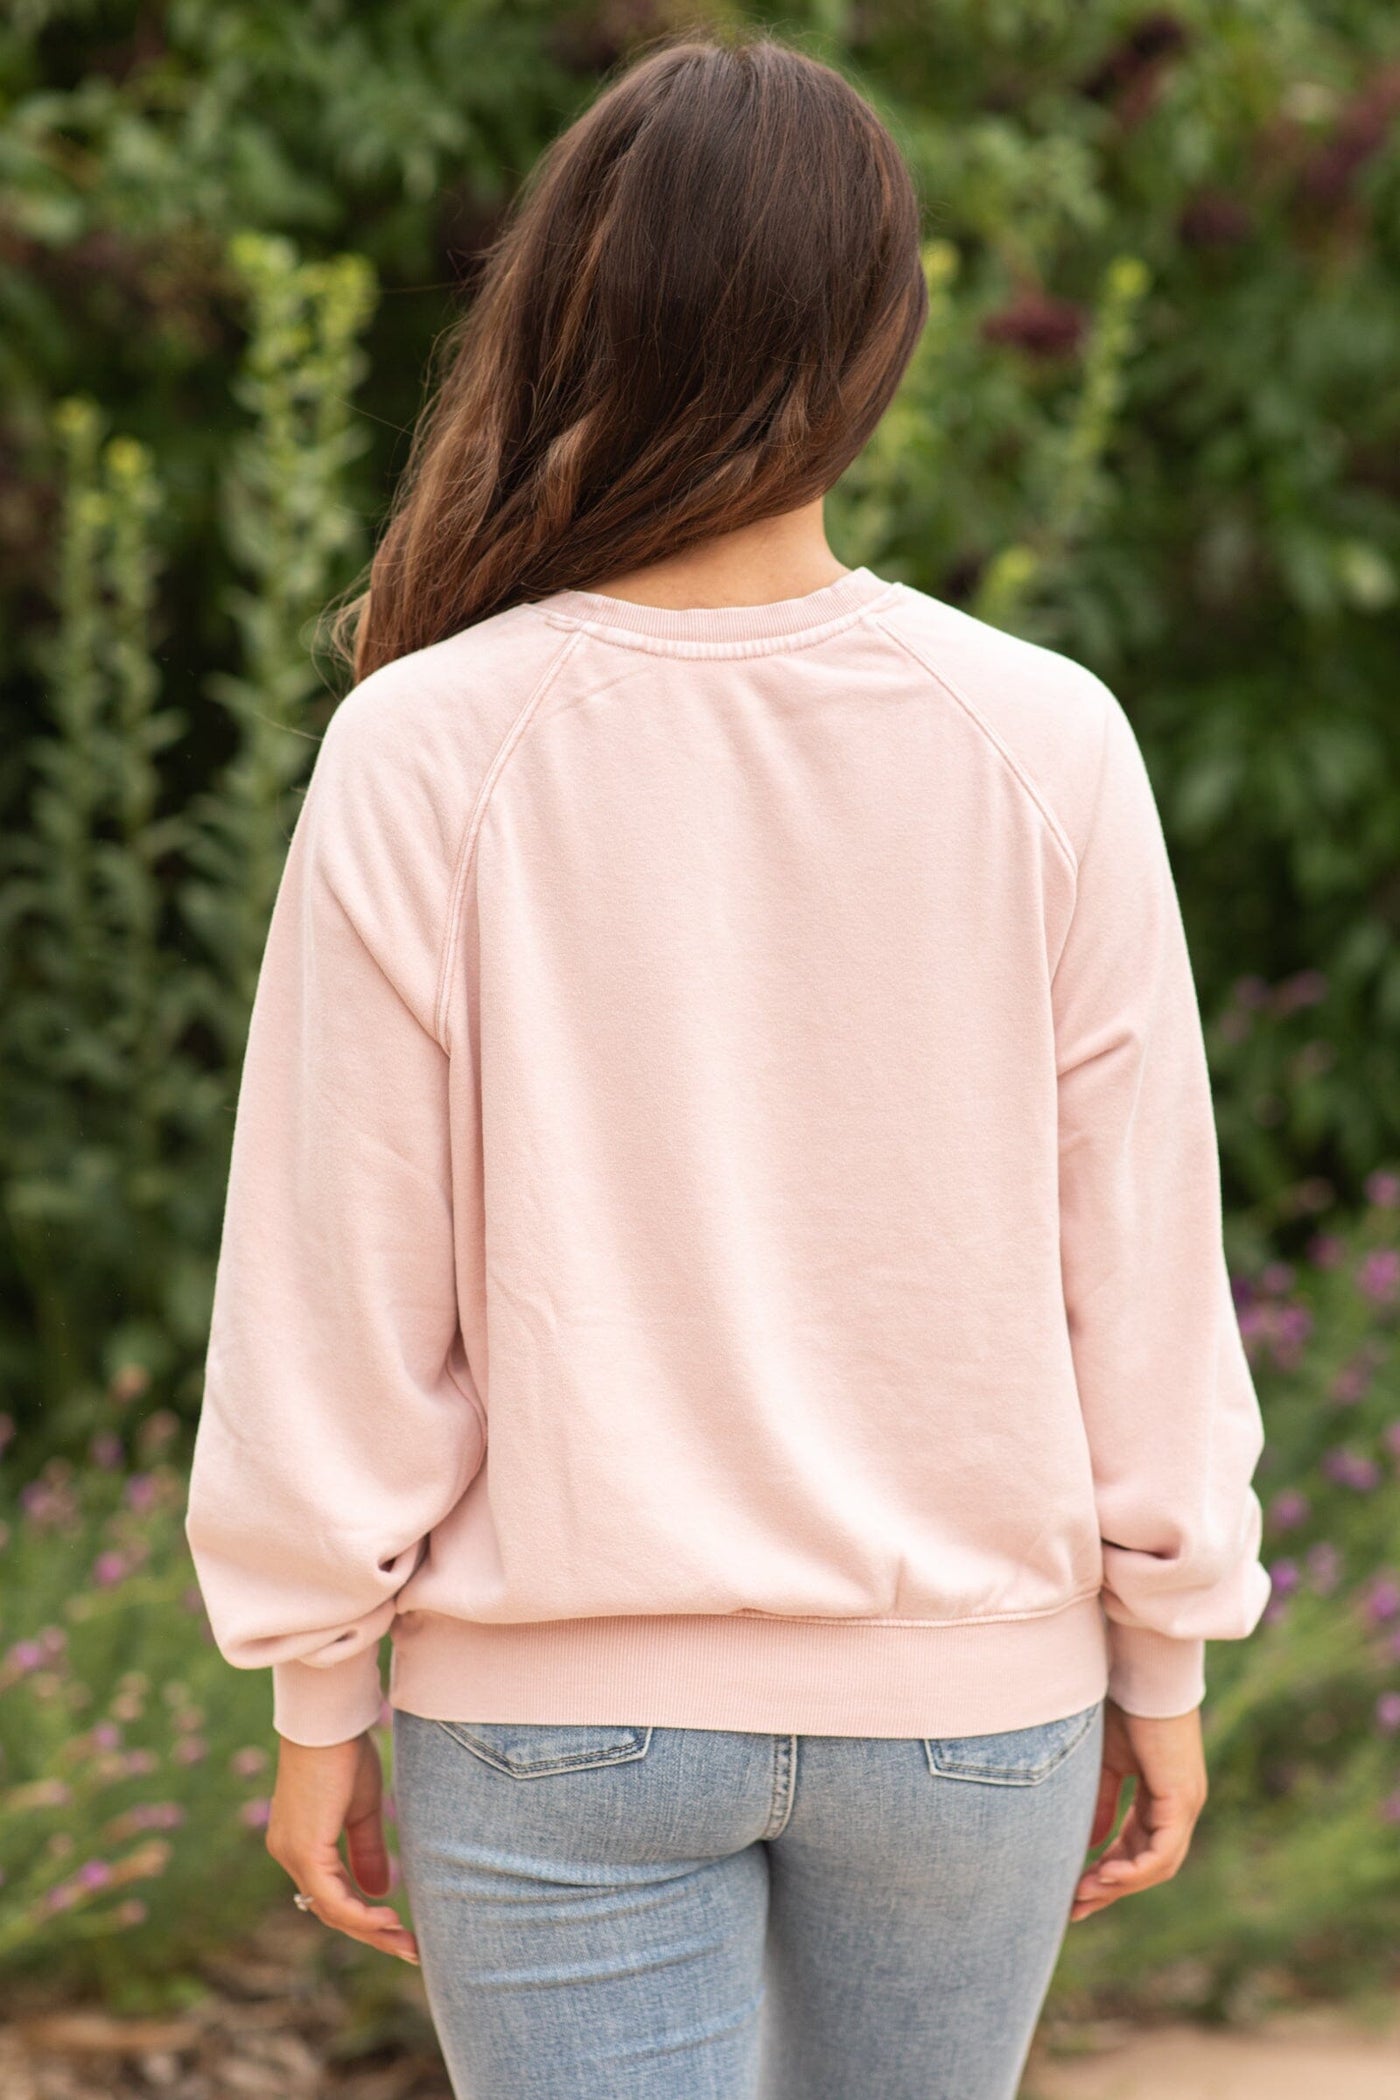 Blush Washed Sweatshirt With Seam Detail - Filly Flair